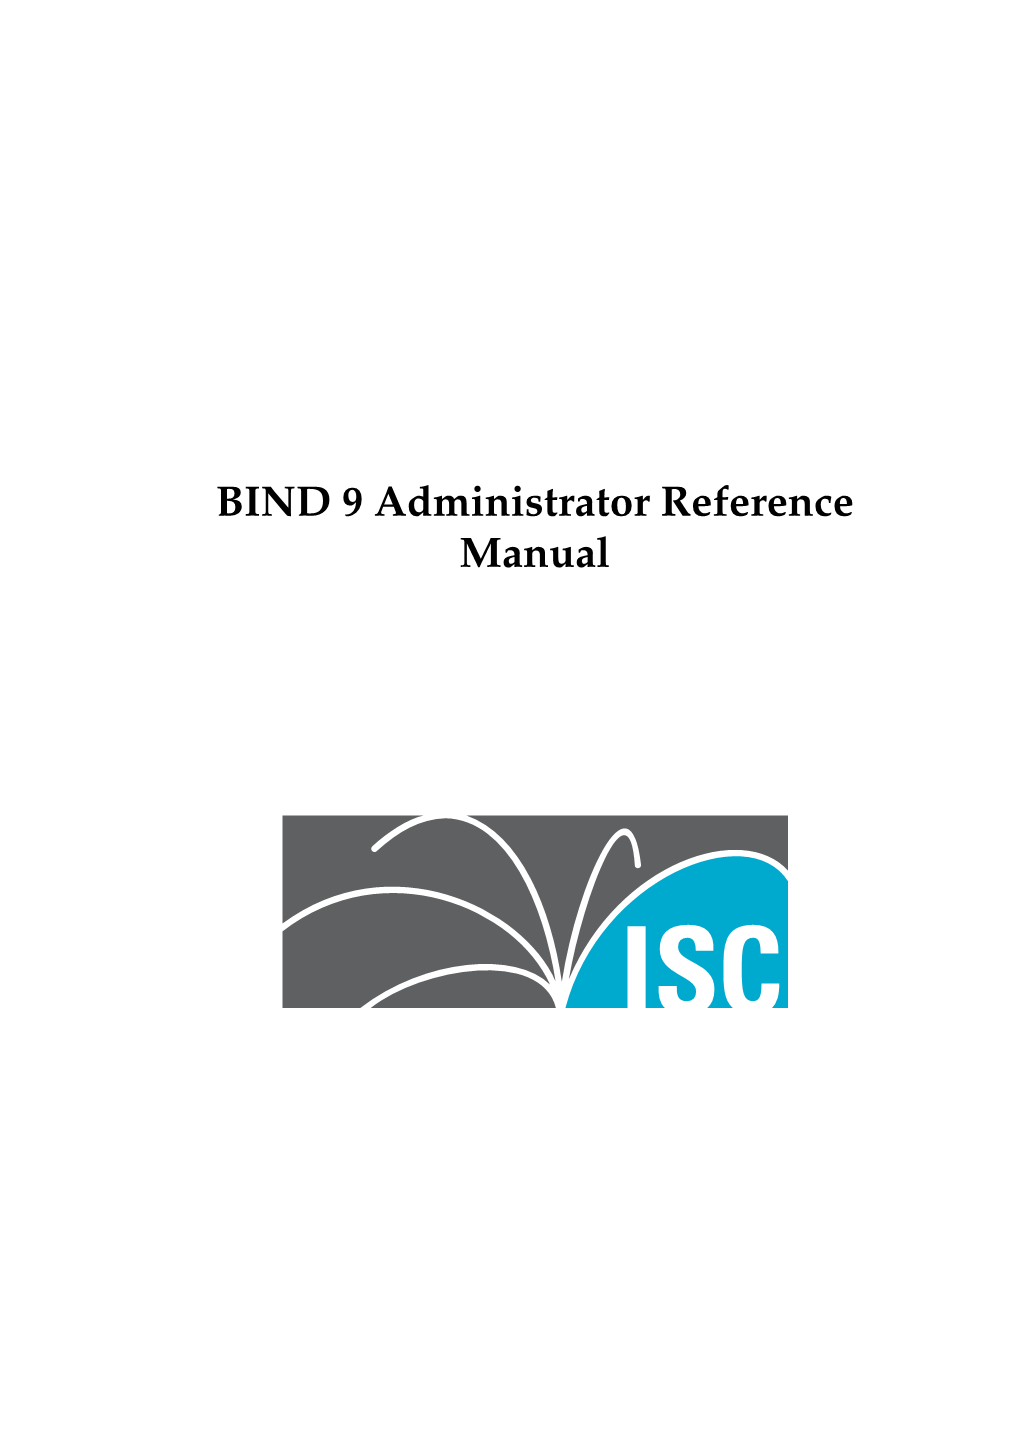 BIND 9 Administrator Reference Manual Copyright C 2004, 2005, 2006, 2007, 2008, 2009, 2010, 2011, 2012, 2013 Internet Systems Consortium, Inc